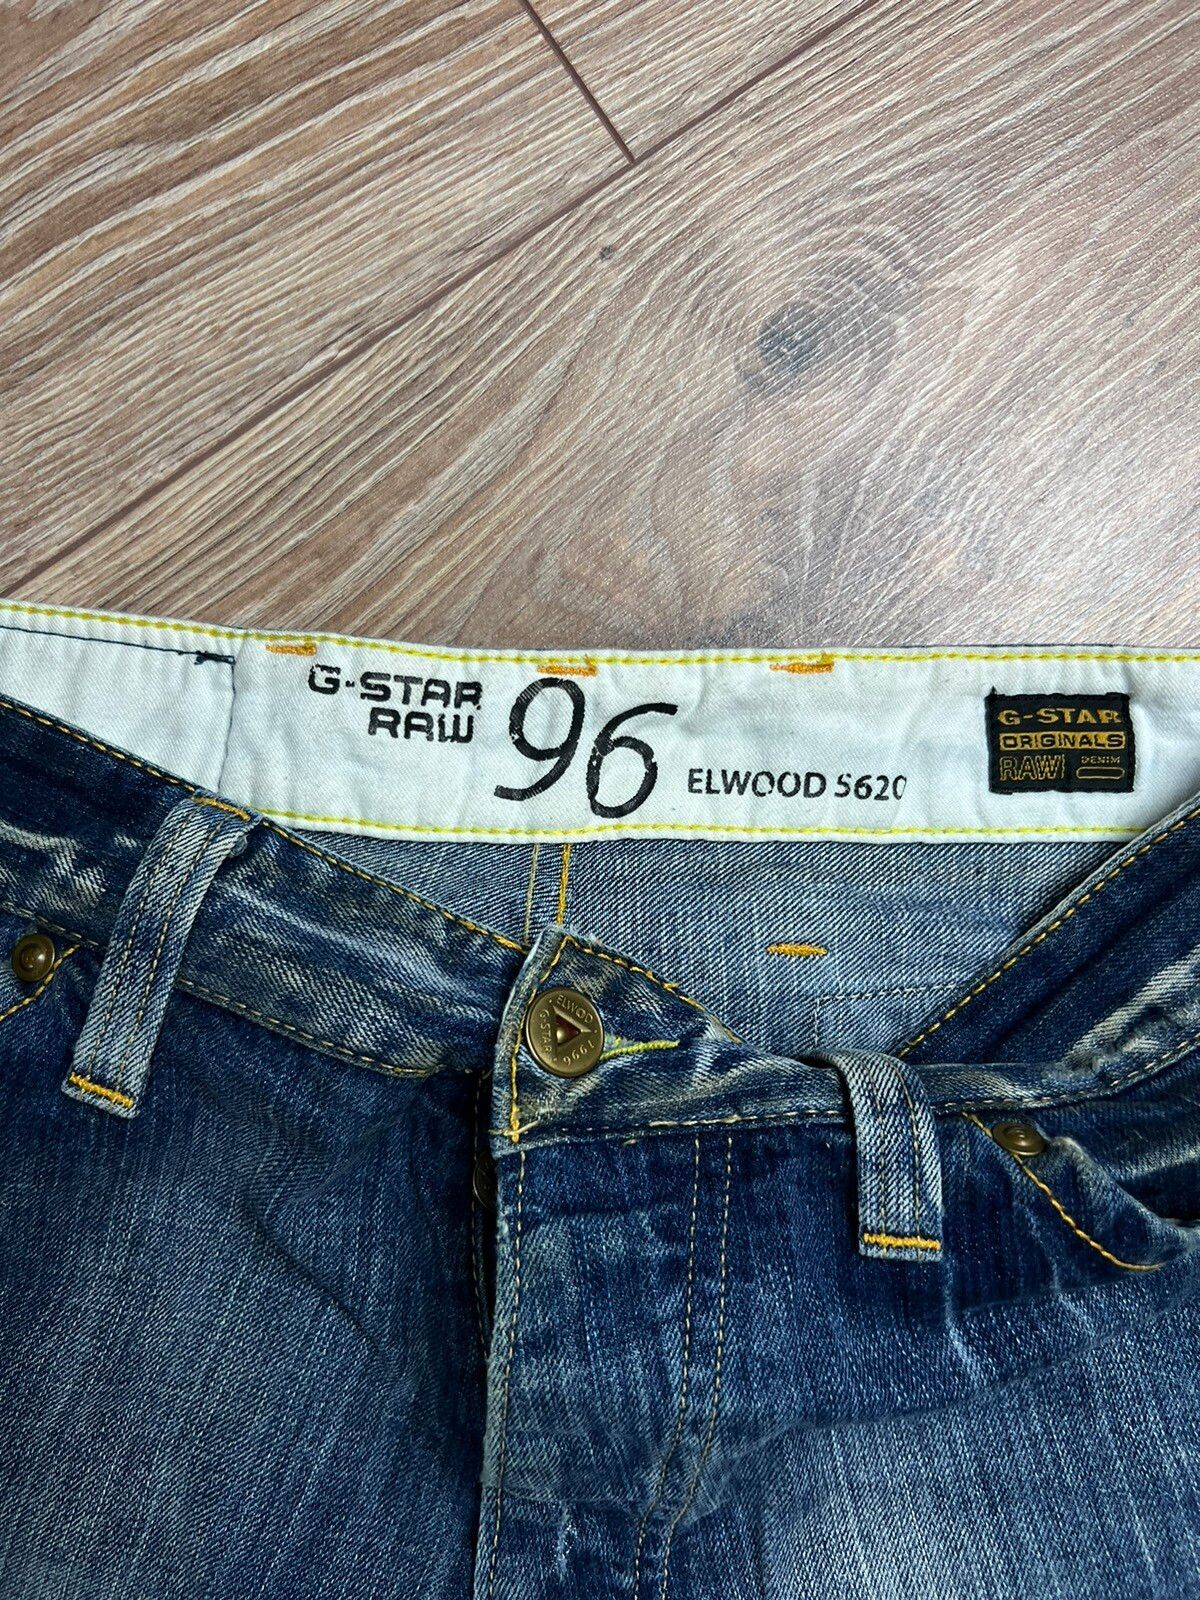 Vintage 💫 90’S G-STAR RAW VINTAGE DOUBLE KNEE OPIUM WASHED JEANS Size US 30 / EU 46 - 10 Thumbnail